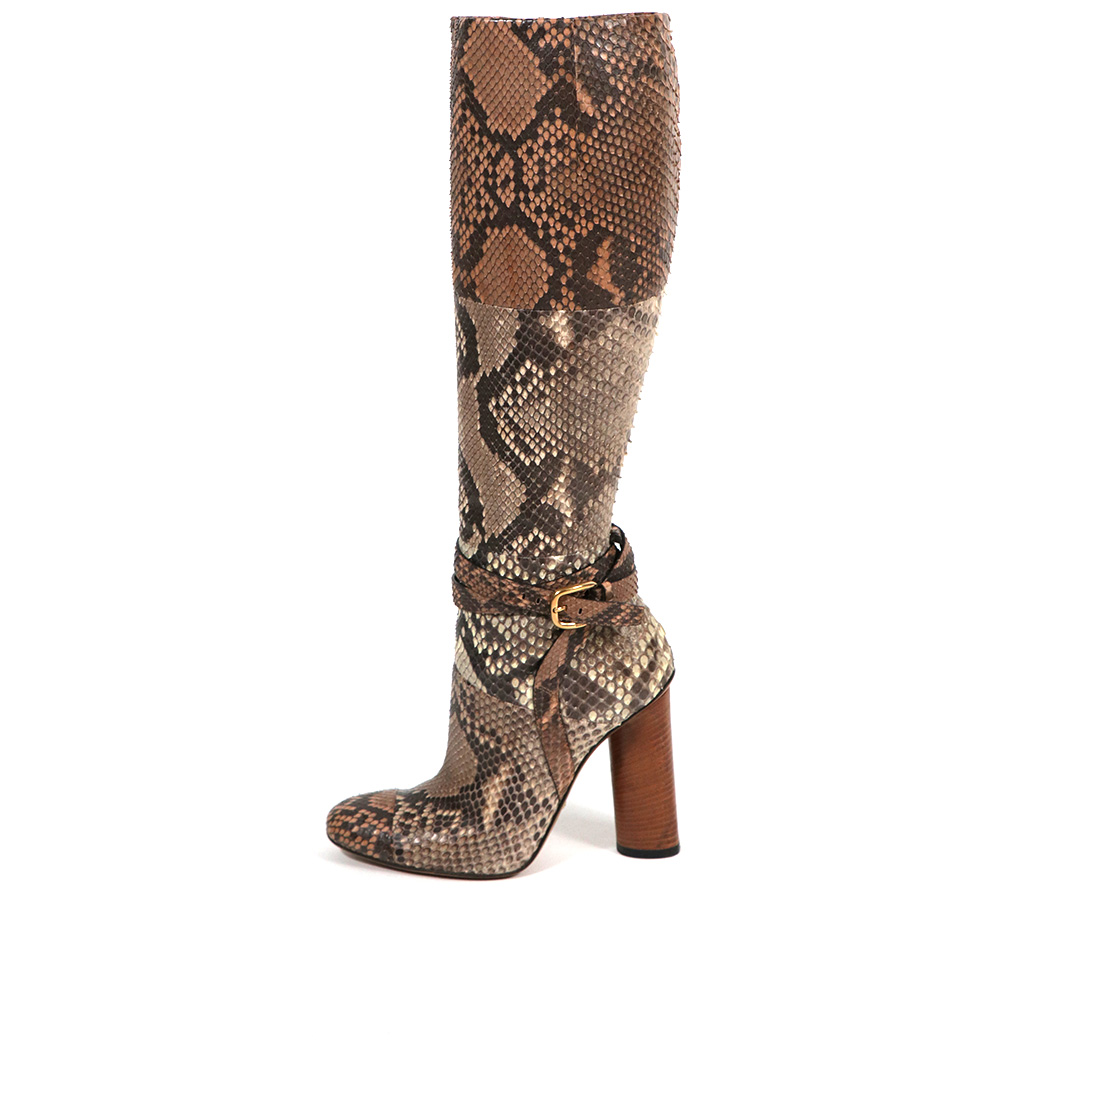 gucci python boots, OFF 79%,www 